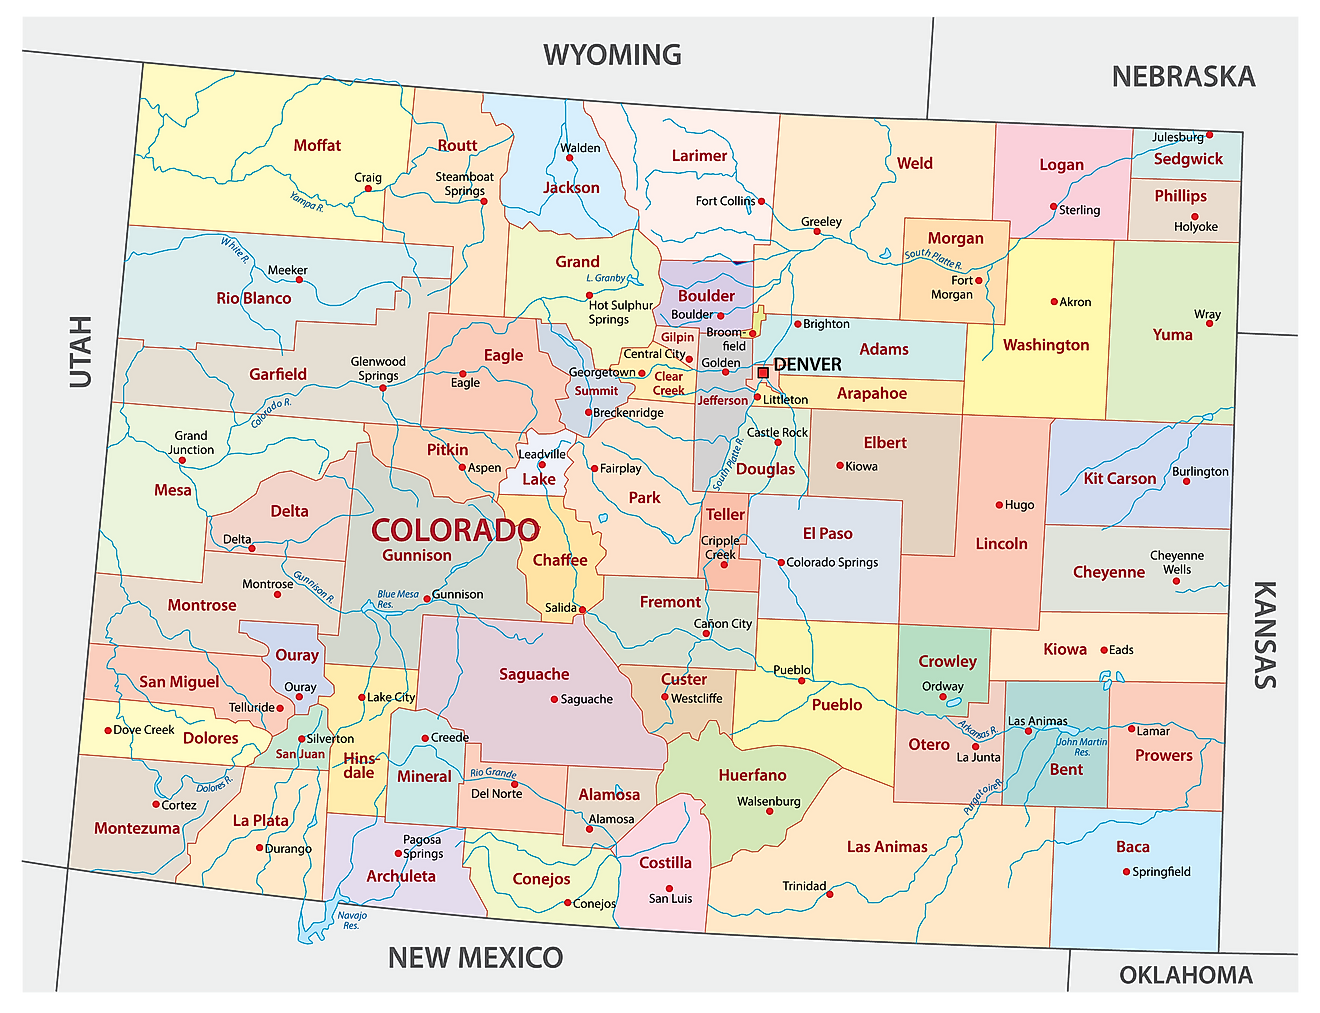 Administrative Map of Colorado showing its 64 counties and the capital city - Denver